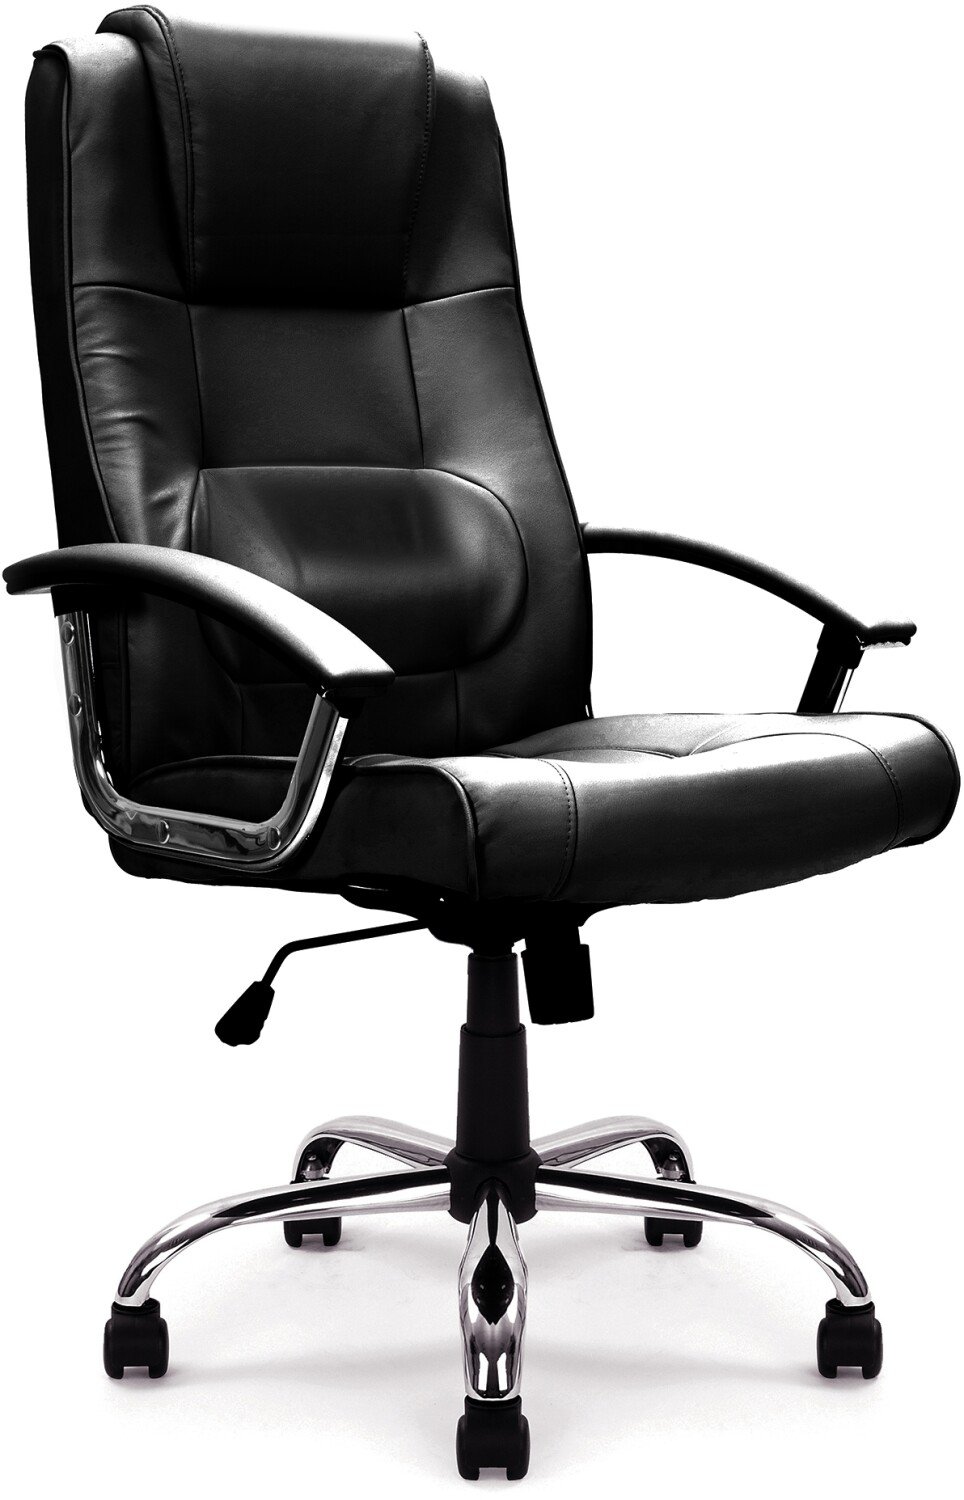 Evre High Back Curved Office Desk Chair in Black Faux Leather & Chrome Finish 